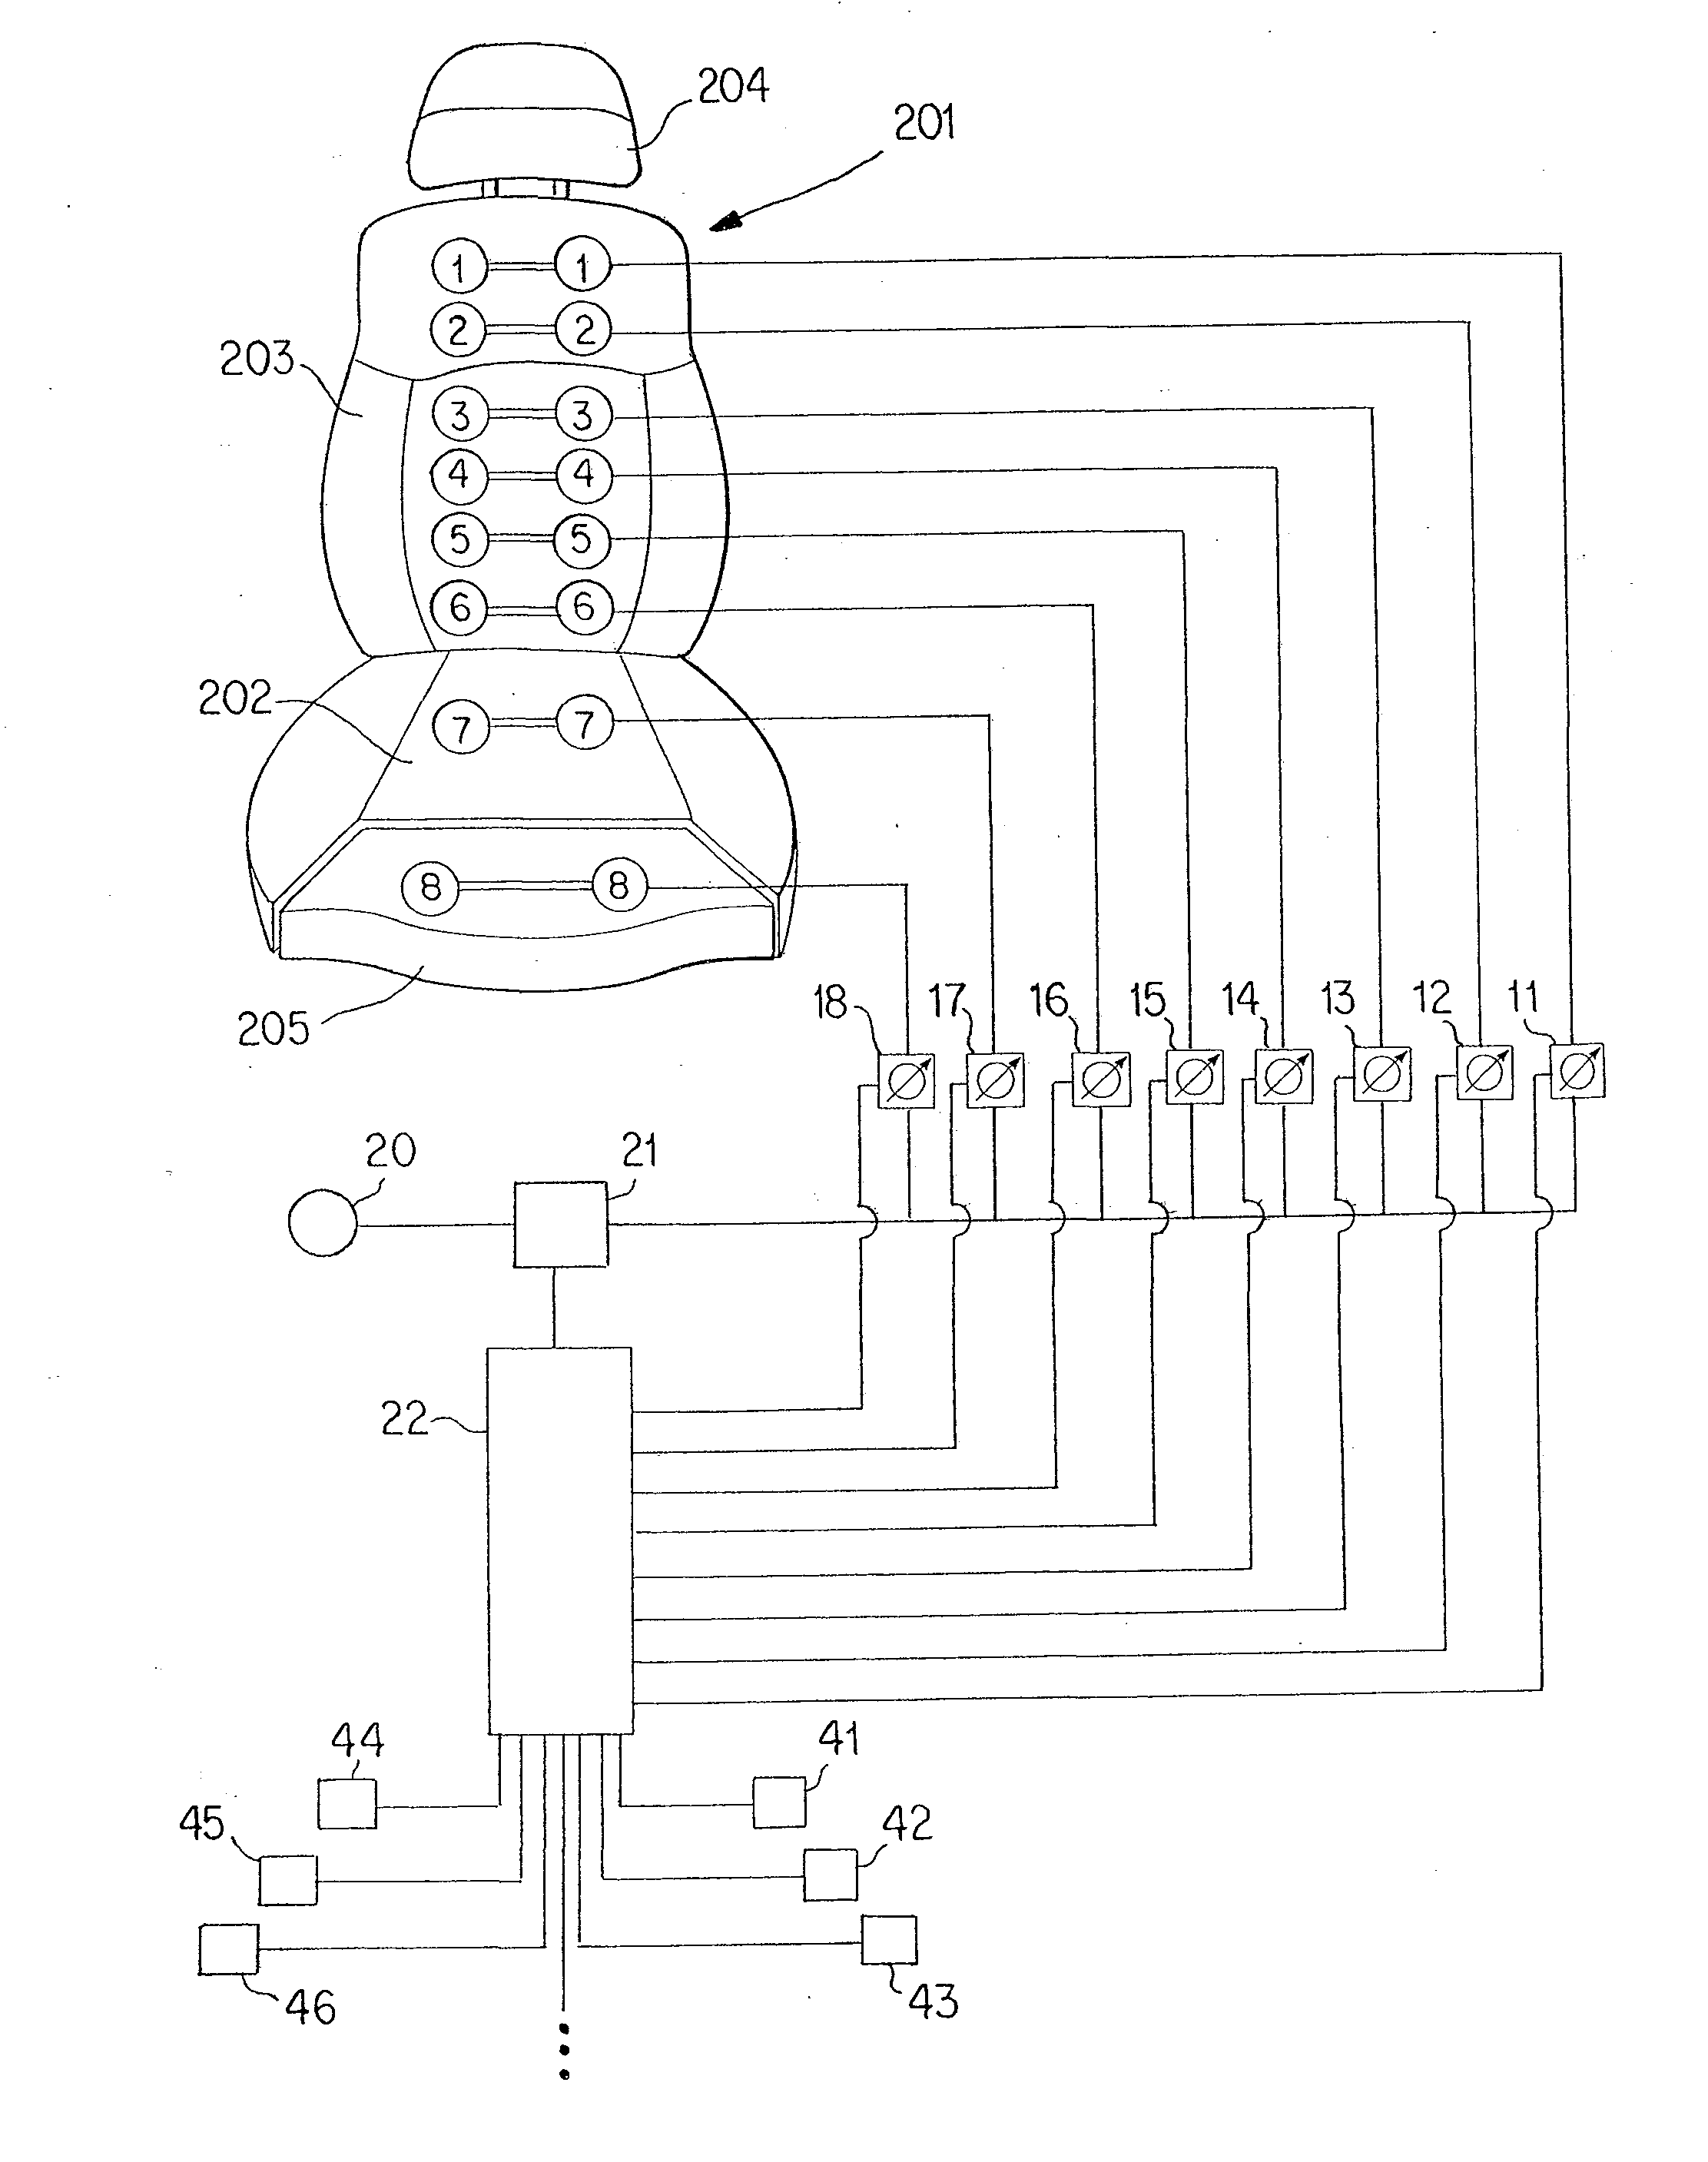 Method and Device for Adjusting a Seat